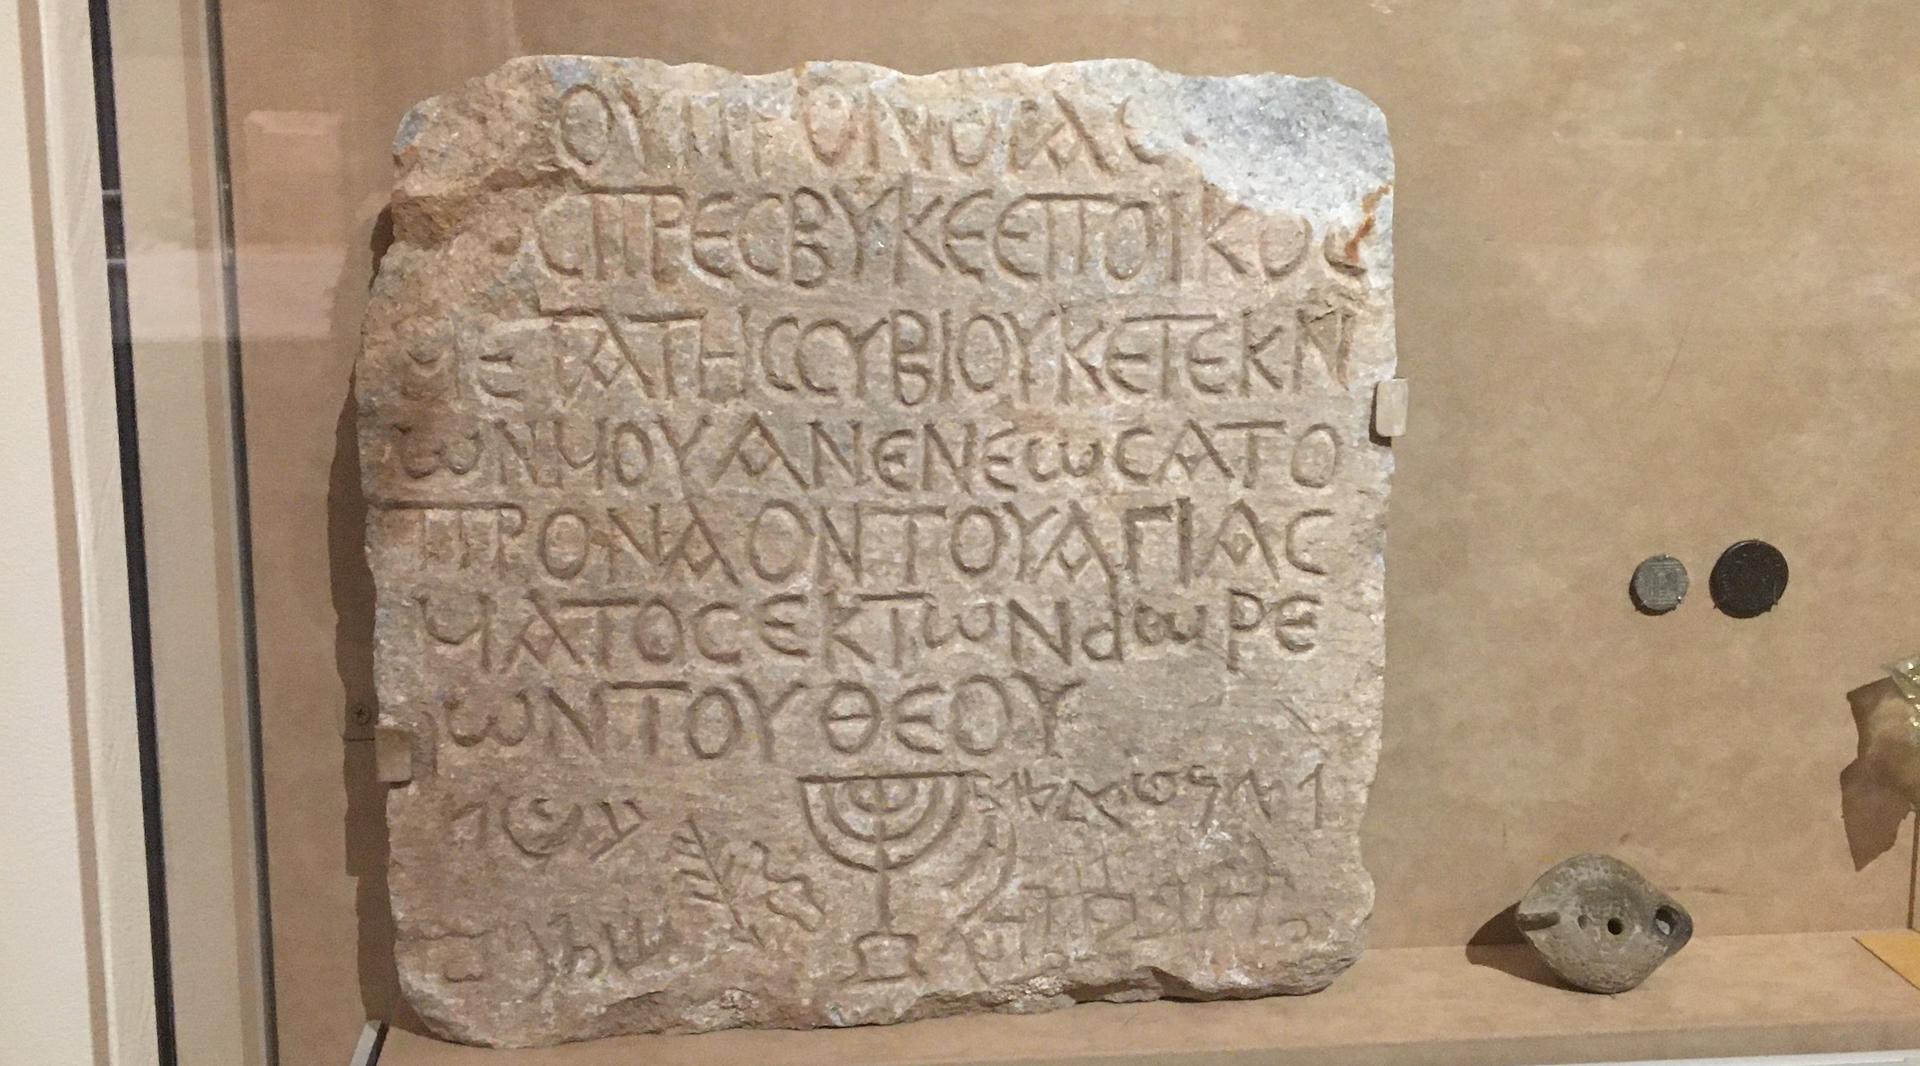 A marble plaque recording a donation to a Roman synagogue is in The Metropolitan Museum of Art, next to the staircase which is lined with the the names of the people who gave donations to the museum. (Jewish Week)